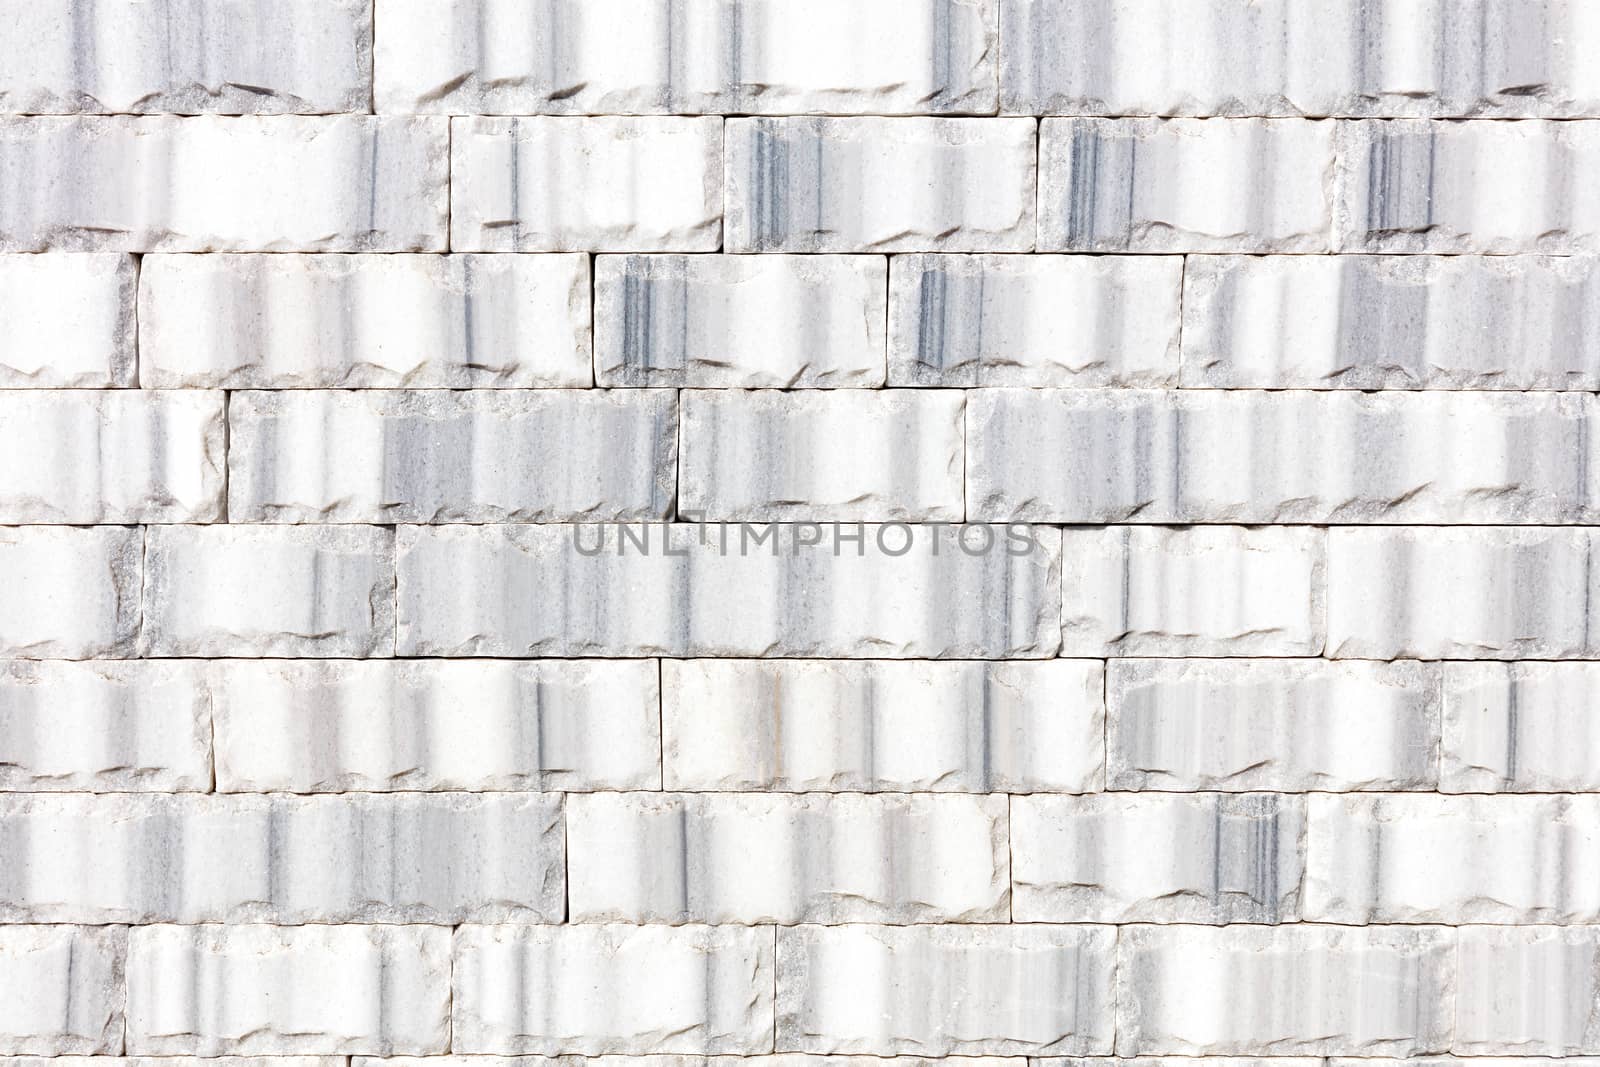 The wall is faced with gray marble tiles, each chipped along the perimeter. by Sergii